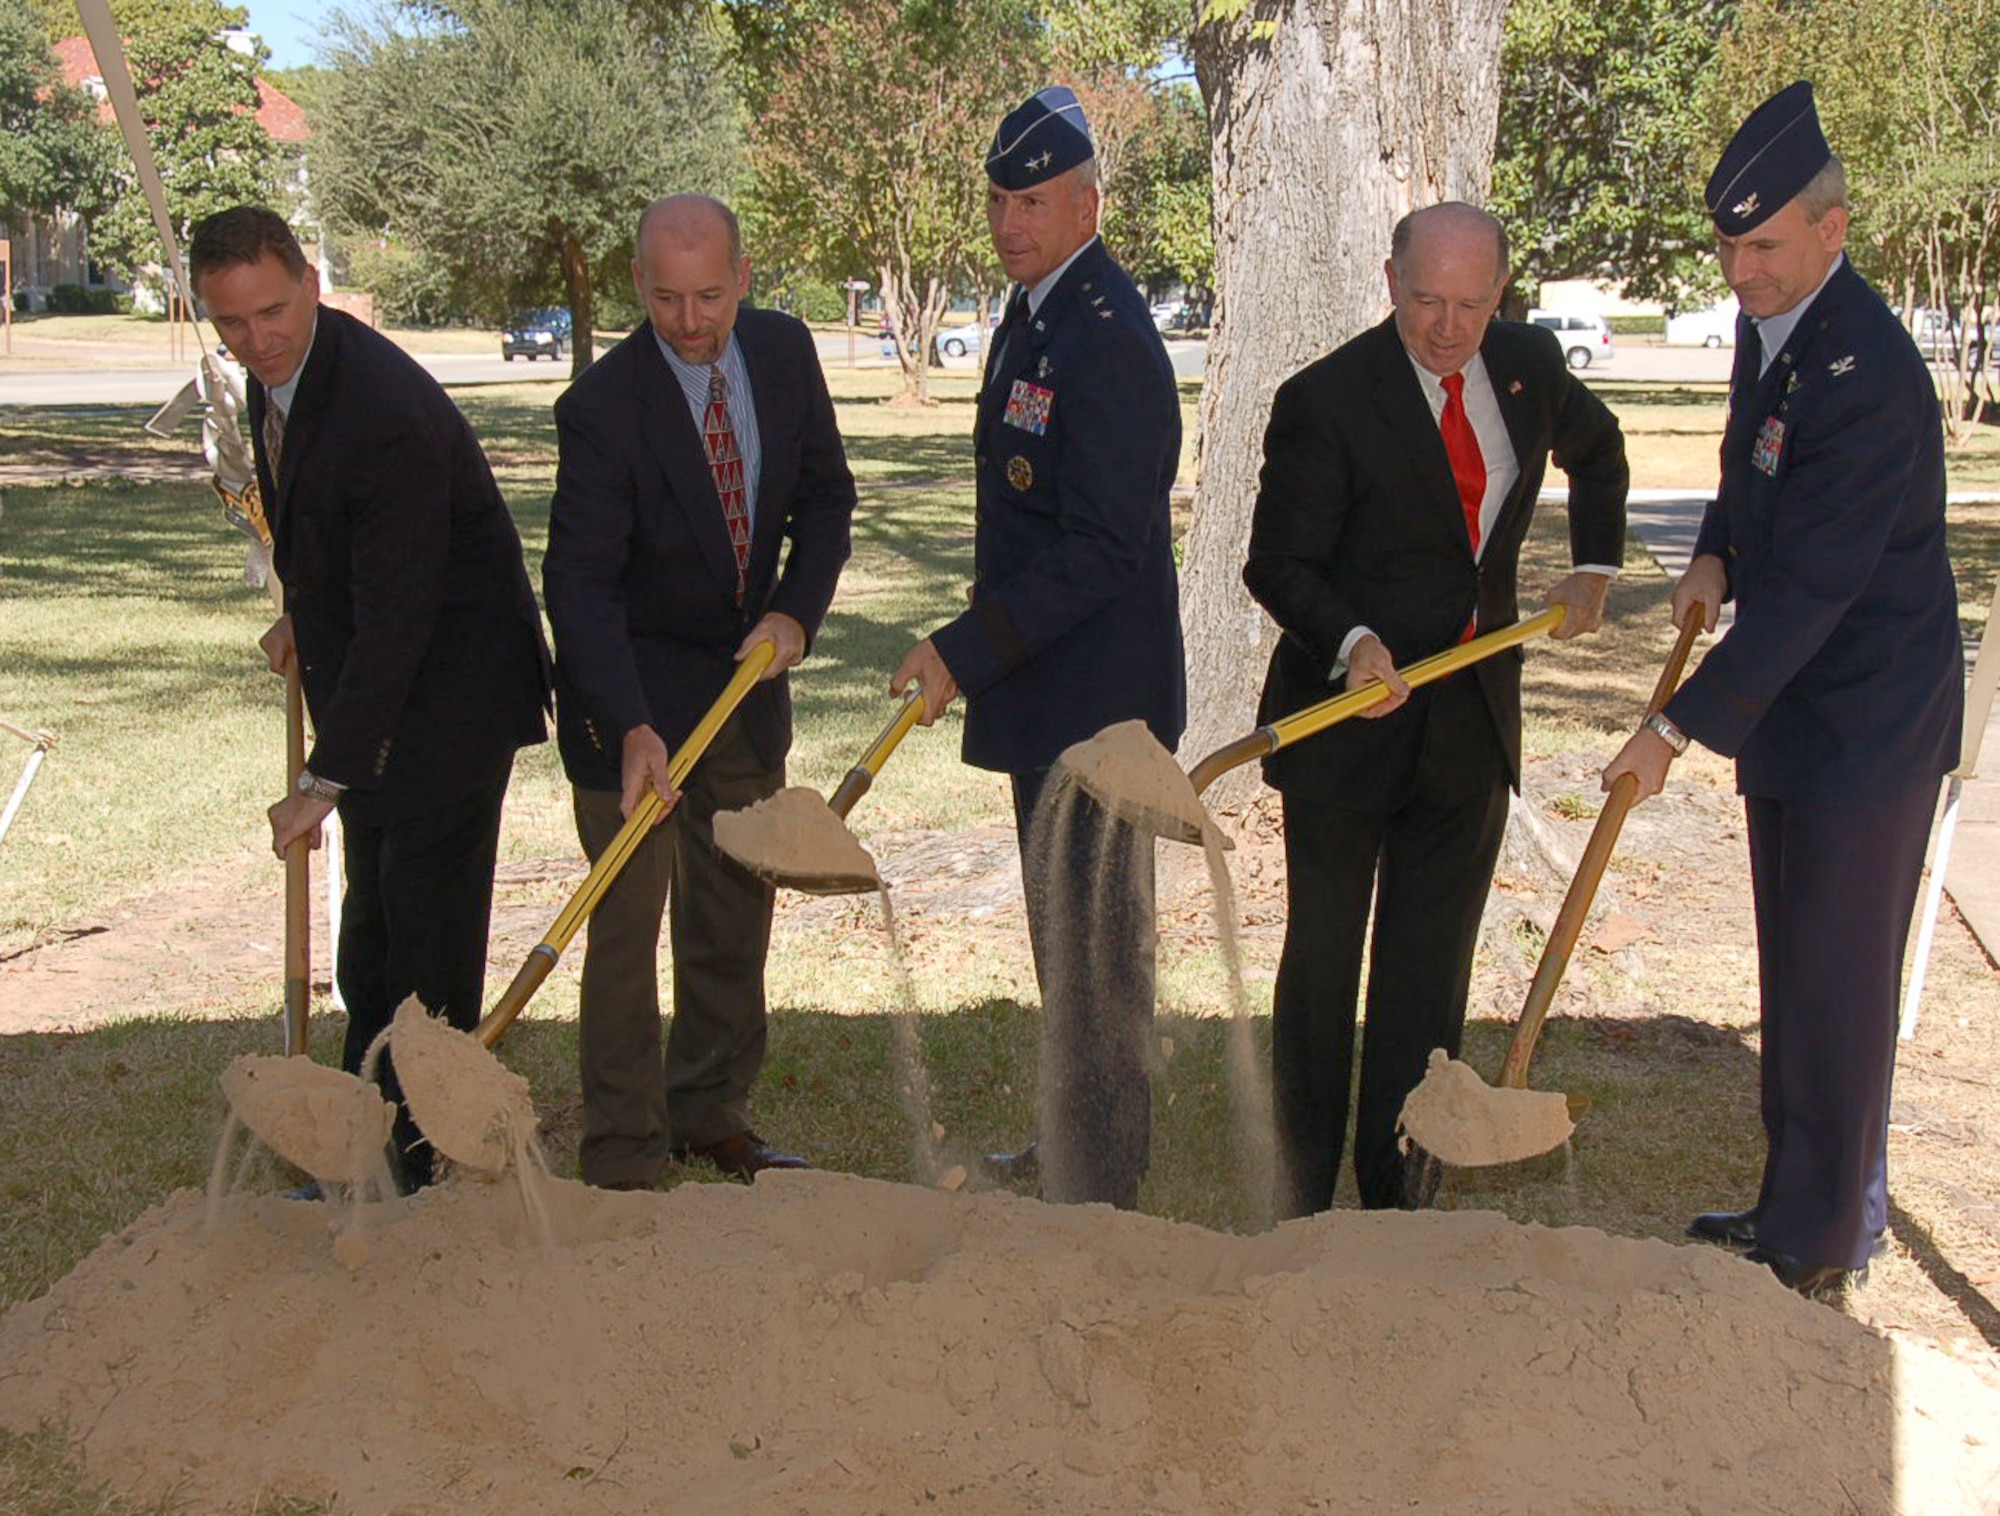 BARKSDALE AIR FORCE BASE, La. – Pat Cartwright, Sauer Inc. regional vice president; Darin Bailey, NAVFAC southeast resident engineer; Maj. Gen. Floyd Carpenter, Eighth Air Force commander; Mayor Lorenz Walker, Bossier City, La., mayor; and Col. Timothy Fay, 2nd Bomb Wing commander, shovel the ceremonial first mound of dirt signifying groundbreaking ceremony on the $25 million renovation to the new Eighth Air Force Headquarters building on Barksdale Air Force Base Oct. 4. The renovation project covers more than 77,000 square feet of office space. Once completed, the headquarters will be equipped with the modern, state-of-the-art communications and information security systems needed to support one of our nation’s most important missions – the mission of nuclear deterrence and global strike operations. (U.S. Air Force photo by Staff Sgt. Brian Stives)